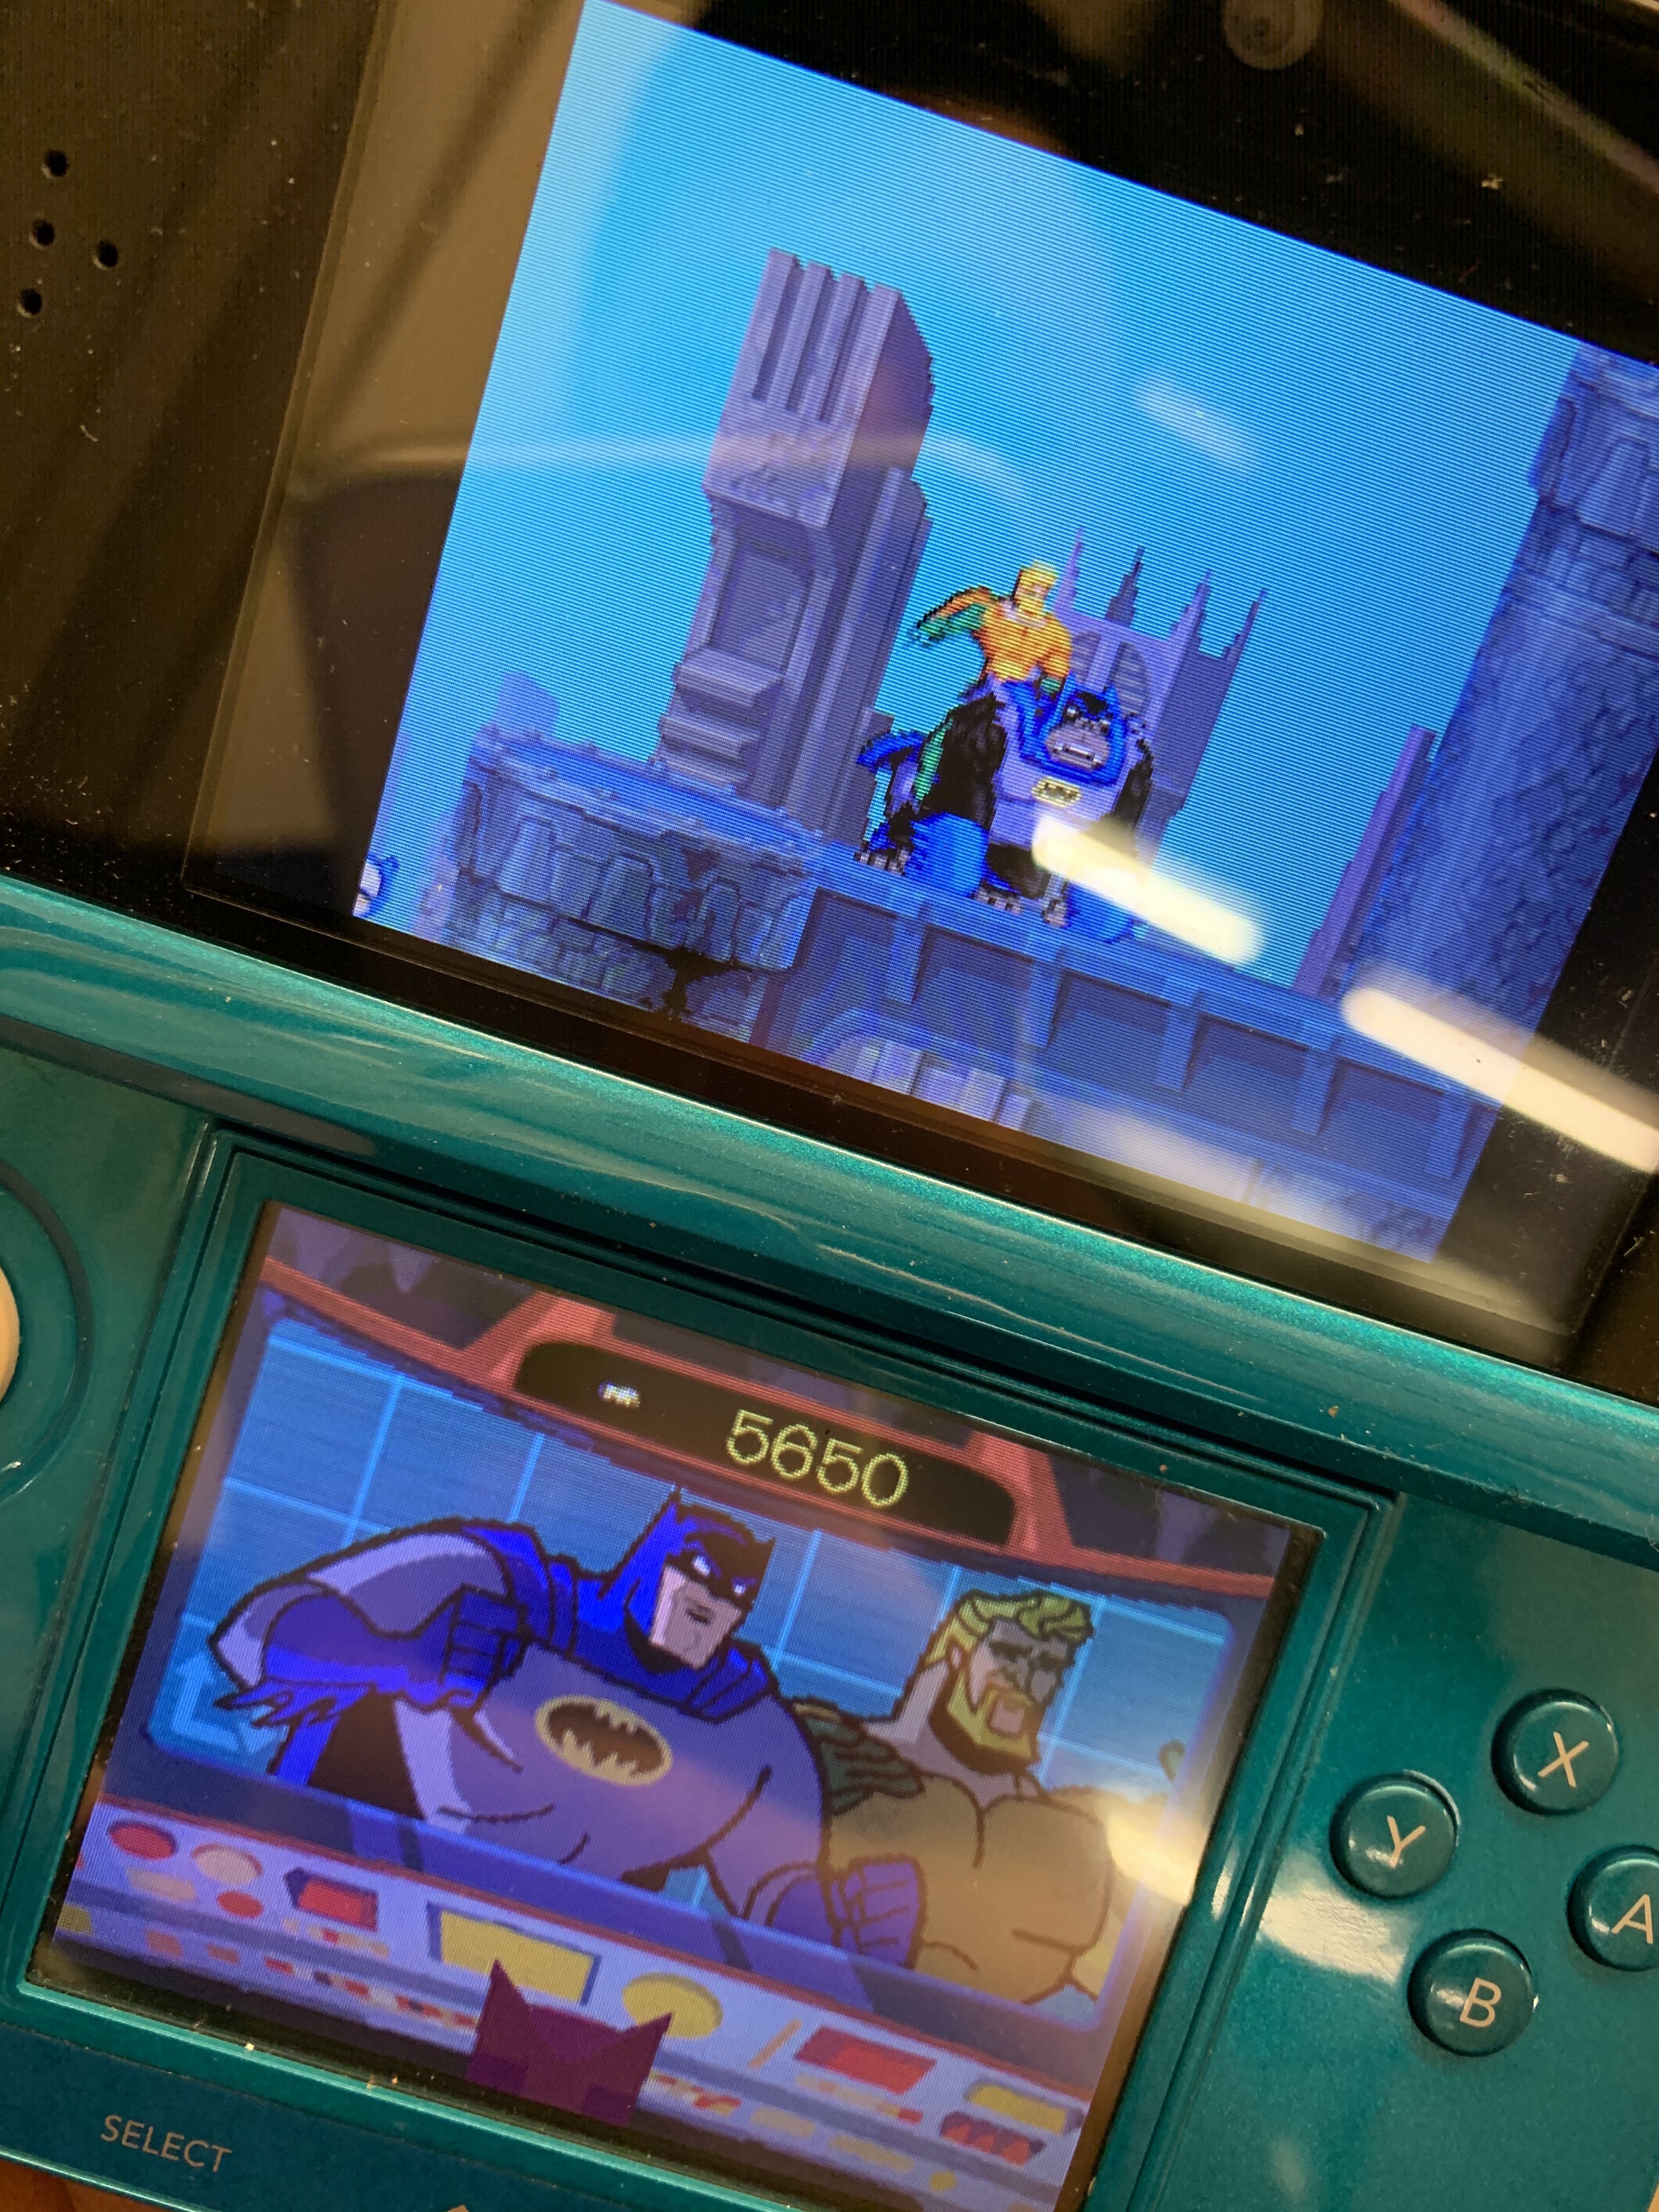 Batman The Brave and The Bold The Videogame on the Nintendo DS, shot on the London Underground